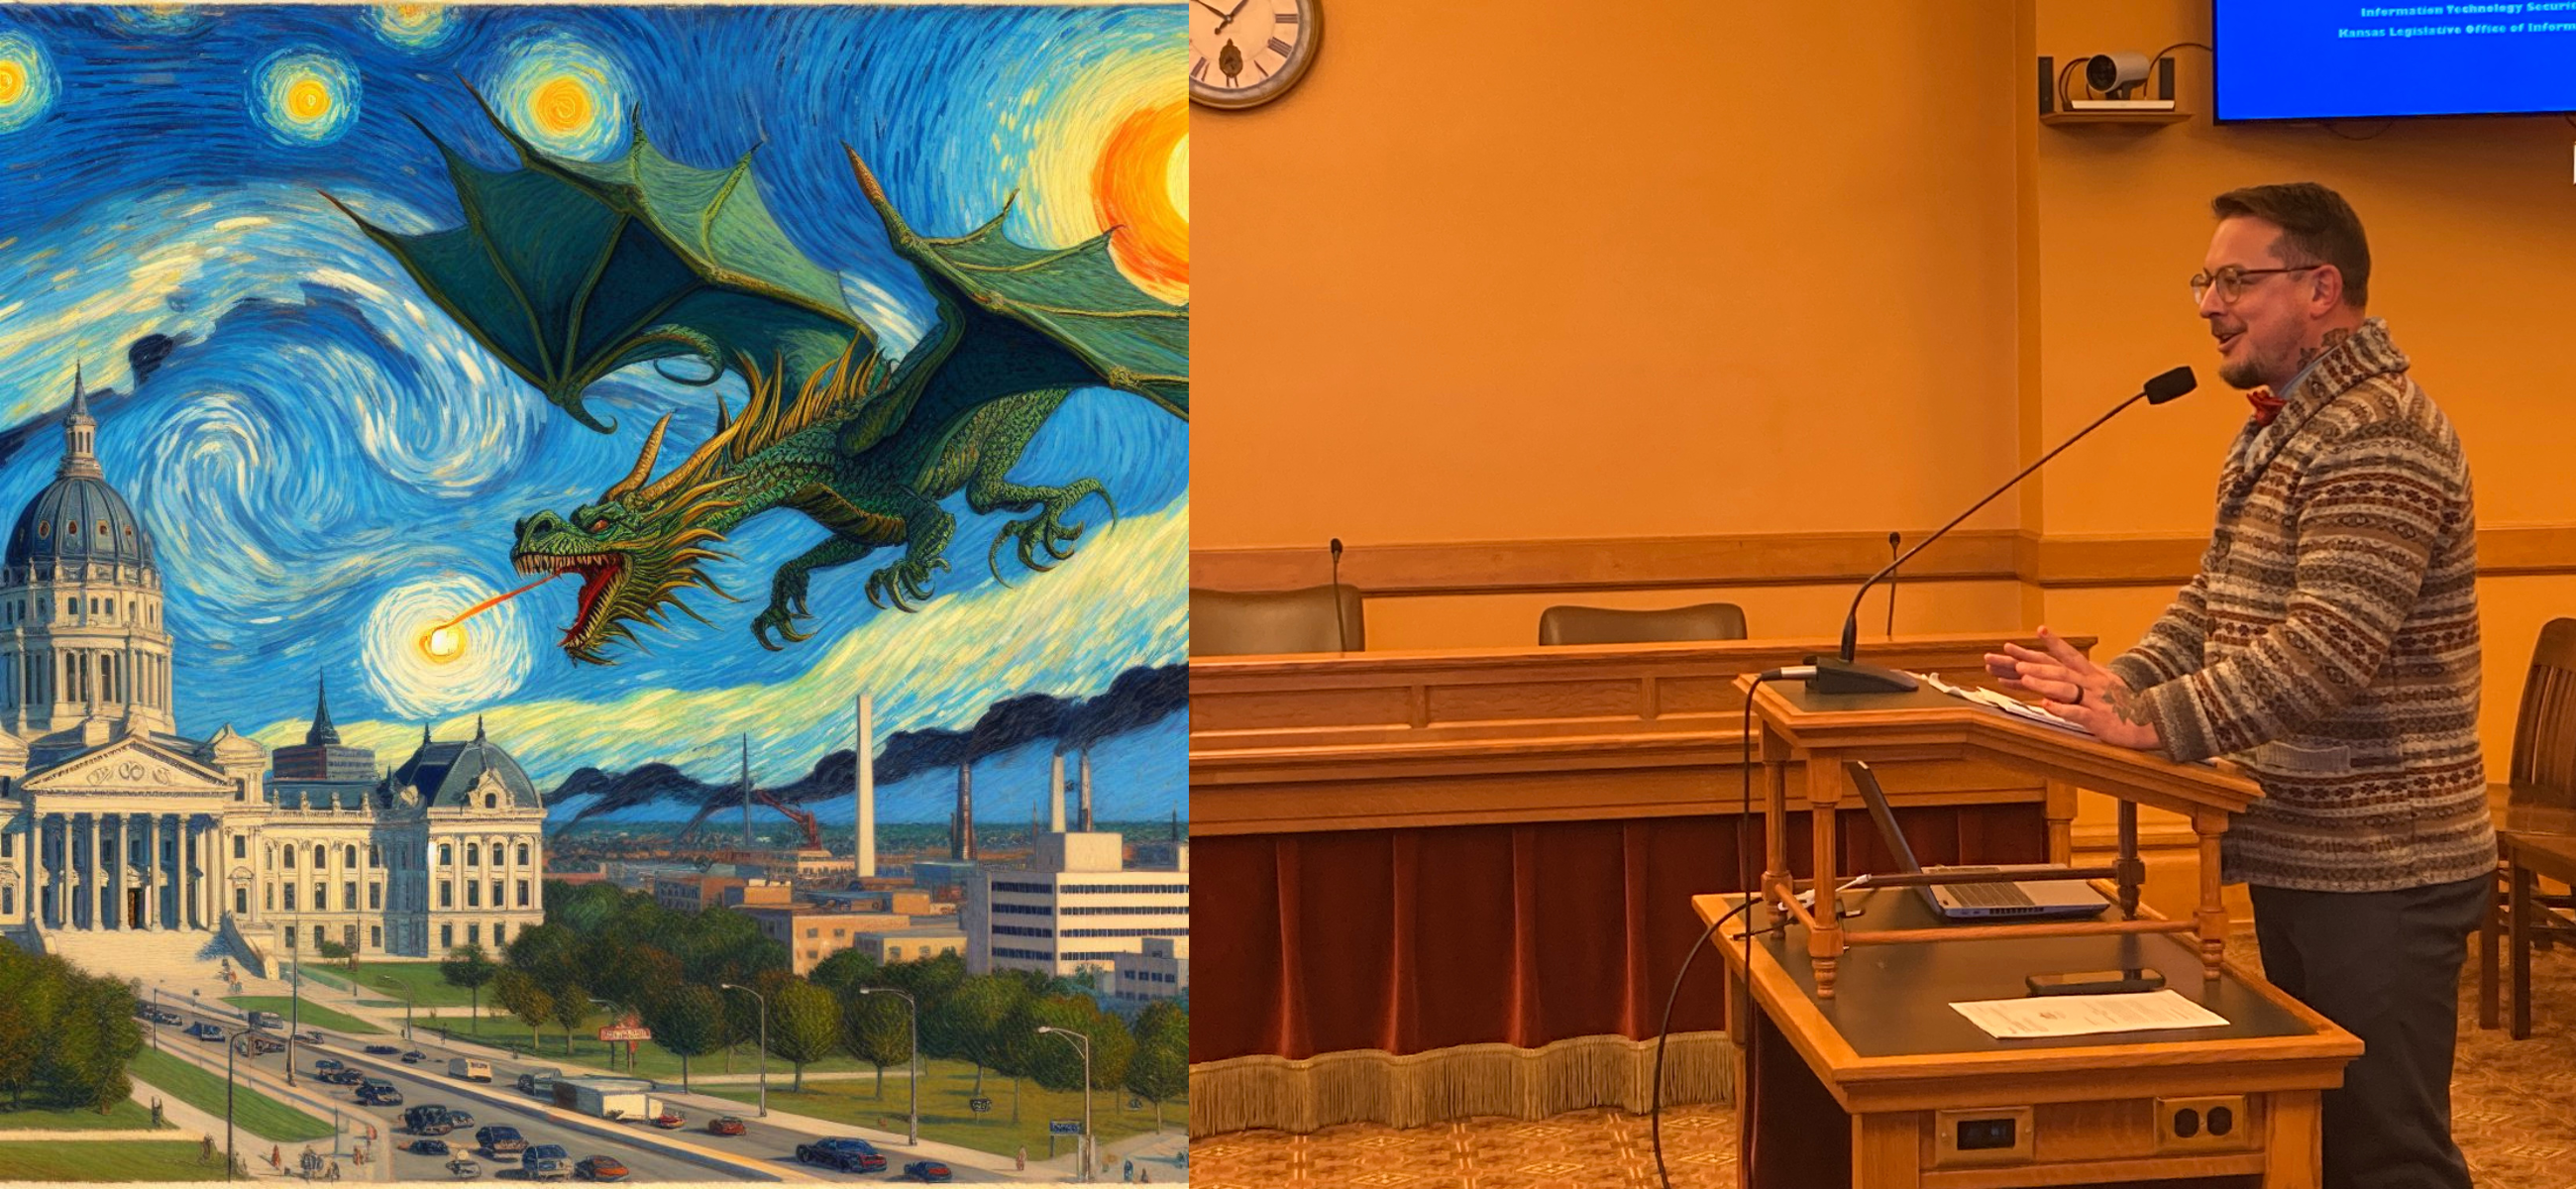 Bob Murphy, information technology security engineer for the Legislative Office of Information Services, gives lawmakers an overview of artificial intelligence during a Wednesday committee hearing. His presentation included AI-generated illustrations of a dragon at the Capitol in the style of Vincent Van Gogh. (Credit: Brett Stover & Bob Murphy)